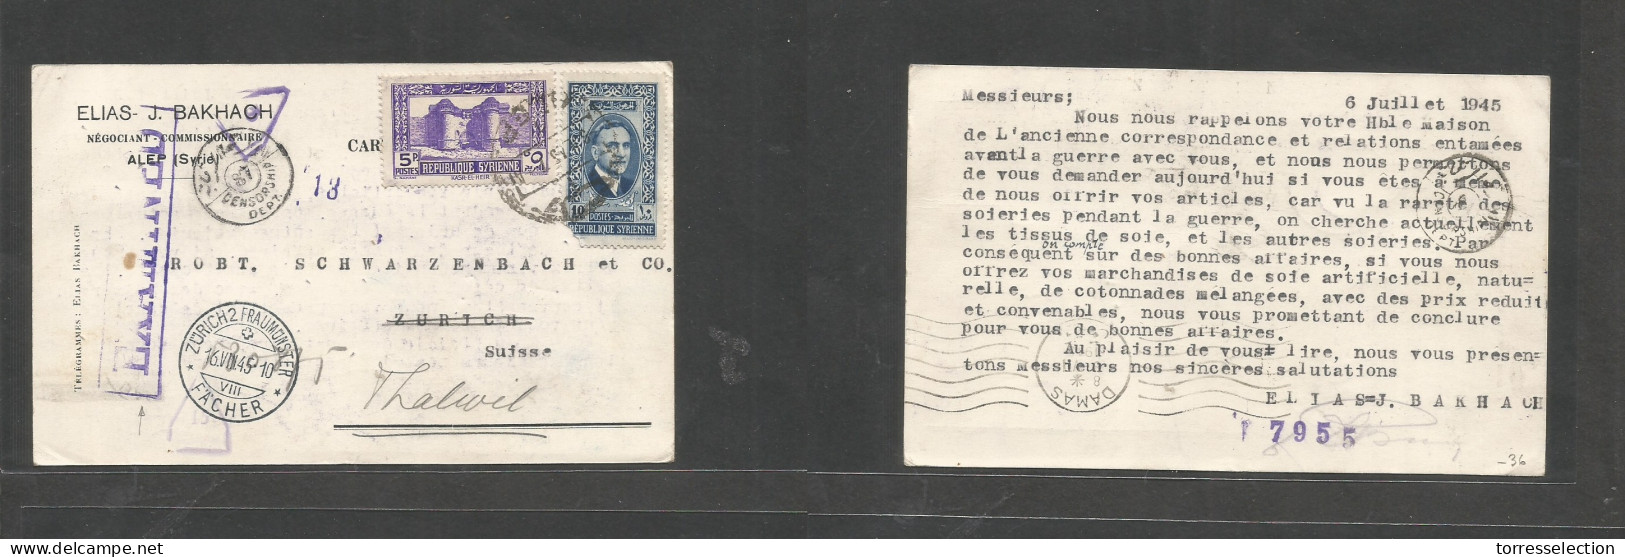 SYRIA. 1945 (5 July) Alep - Switzerland, Thalwil Via Zurich (16 Aug) Comercial Private Multifkd Card At 15p Rate, Cds Wi - Siria